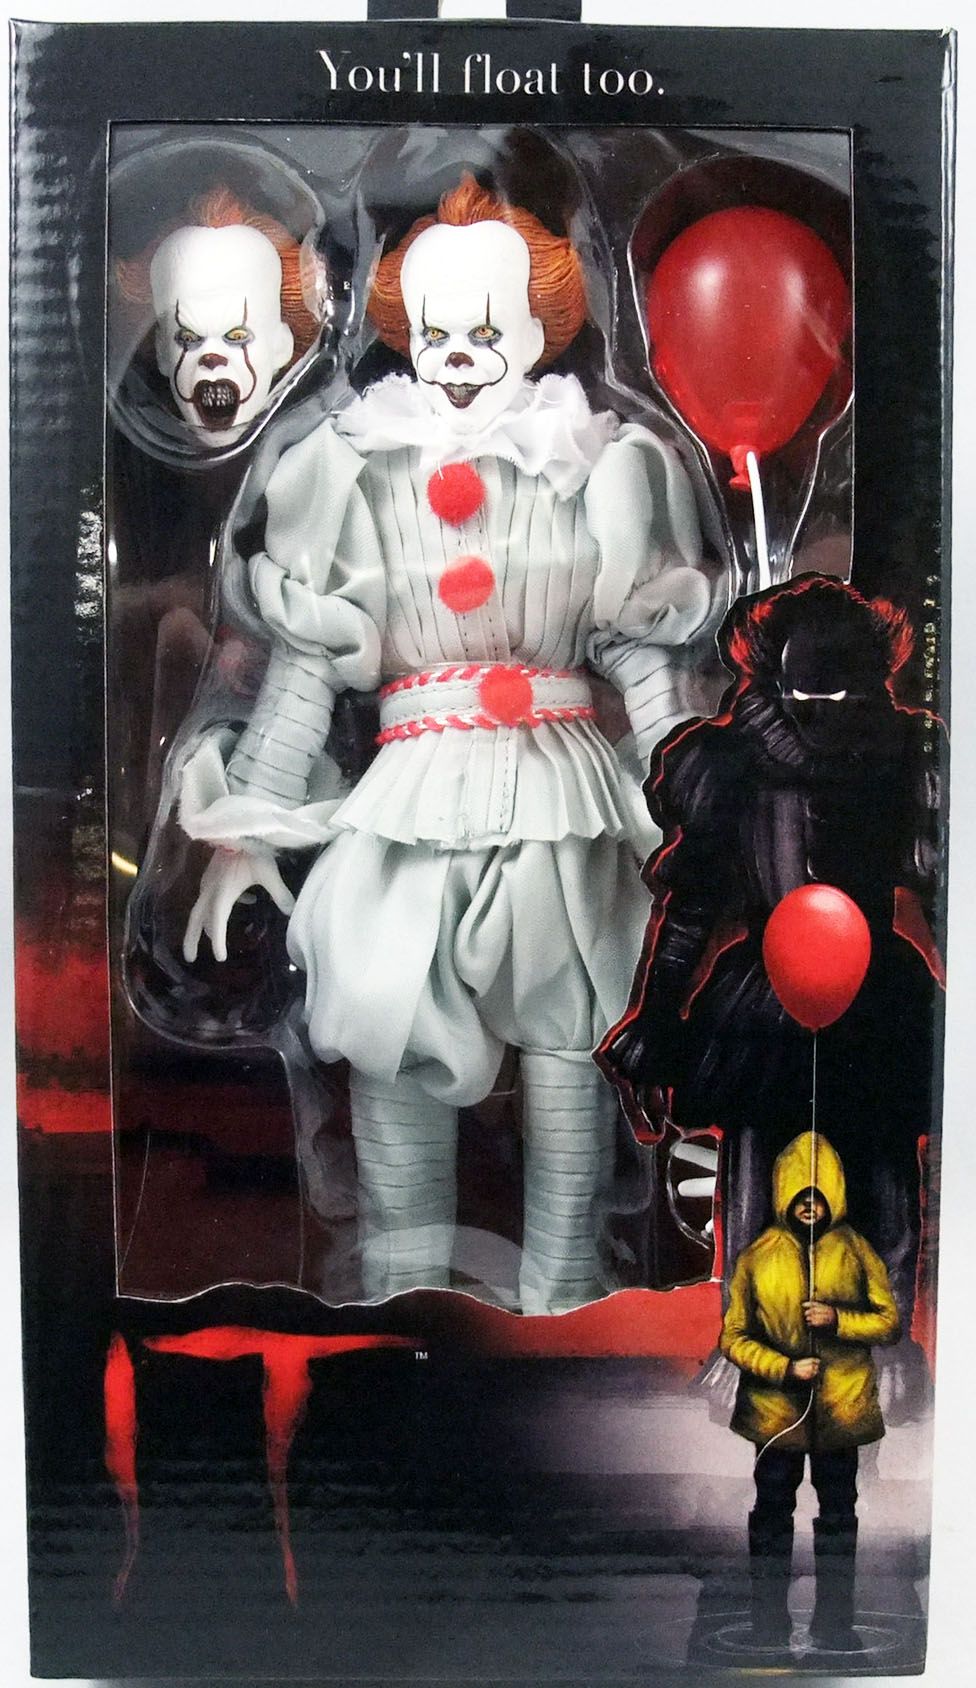 pennywise neca action figure